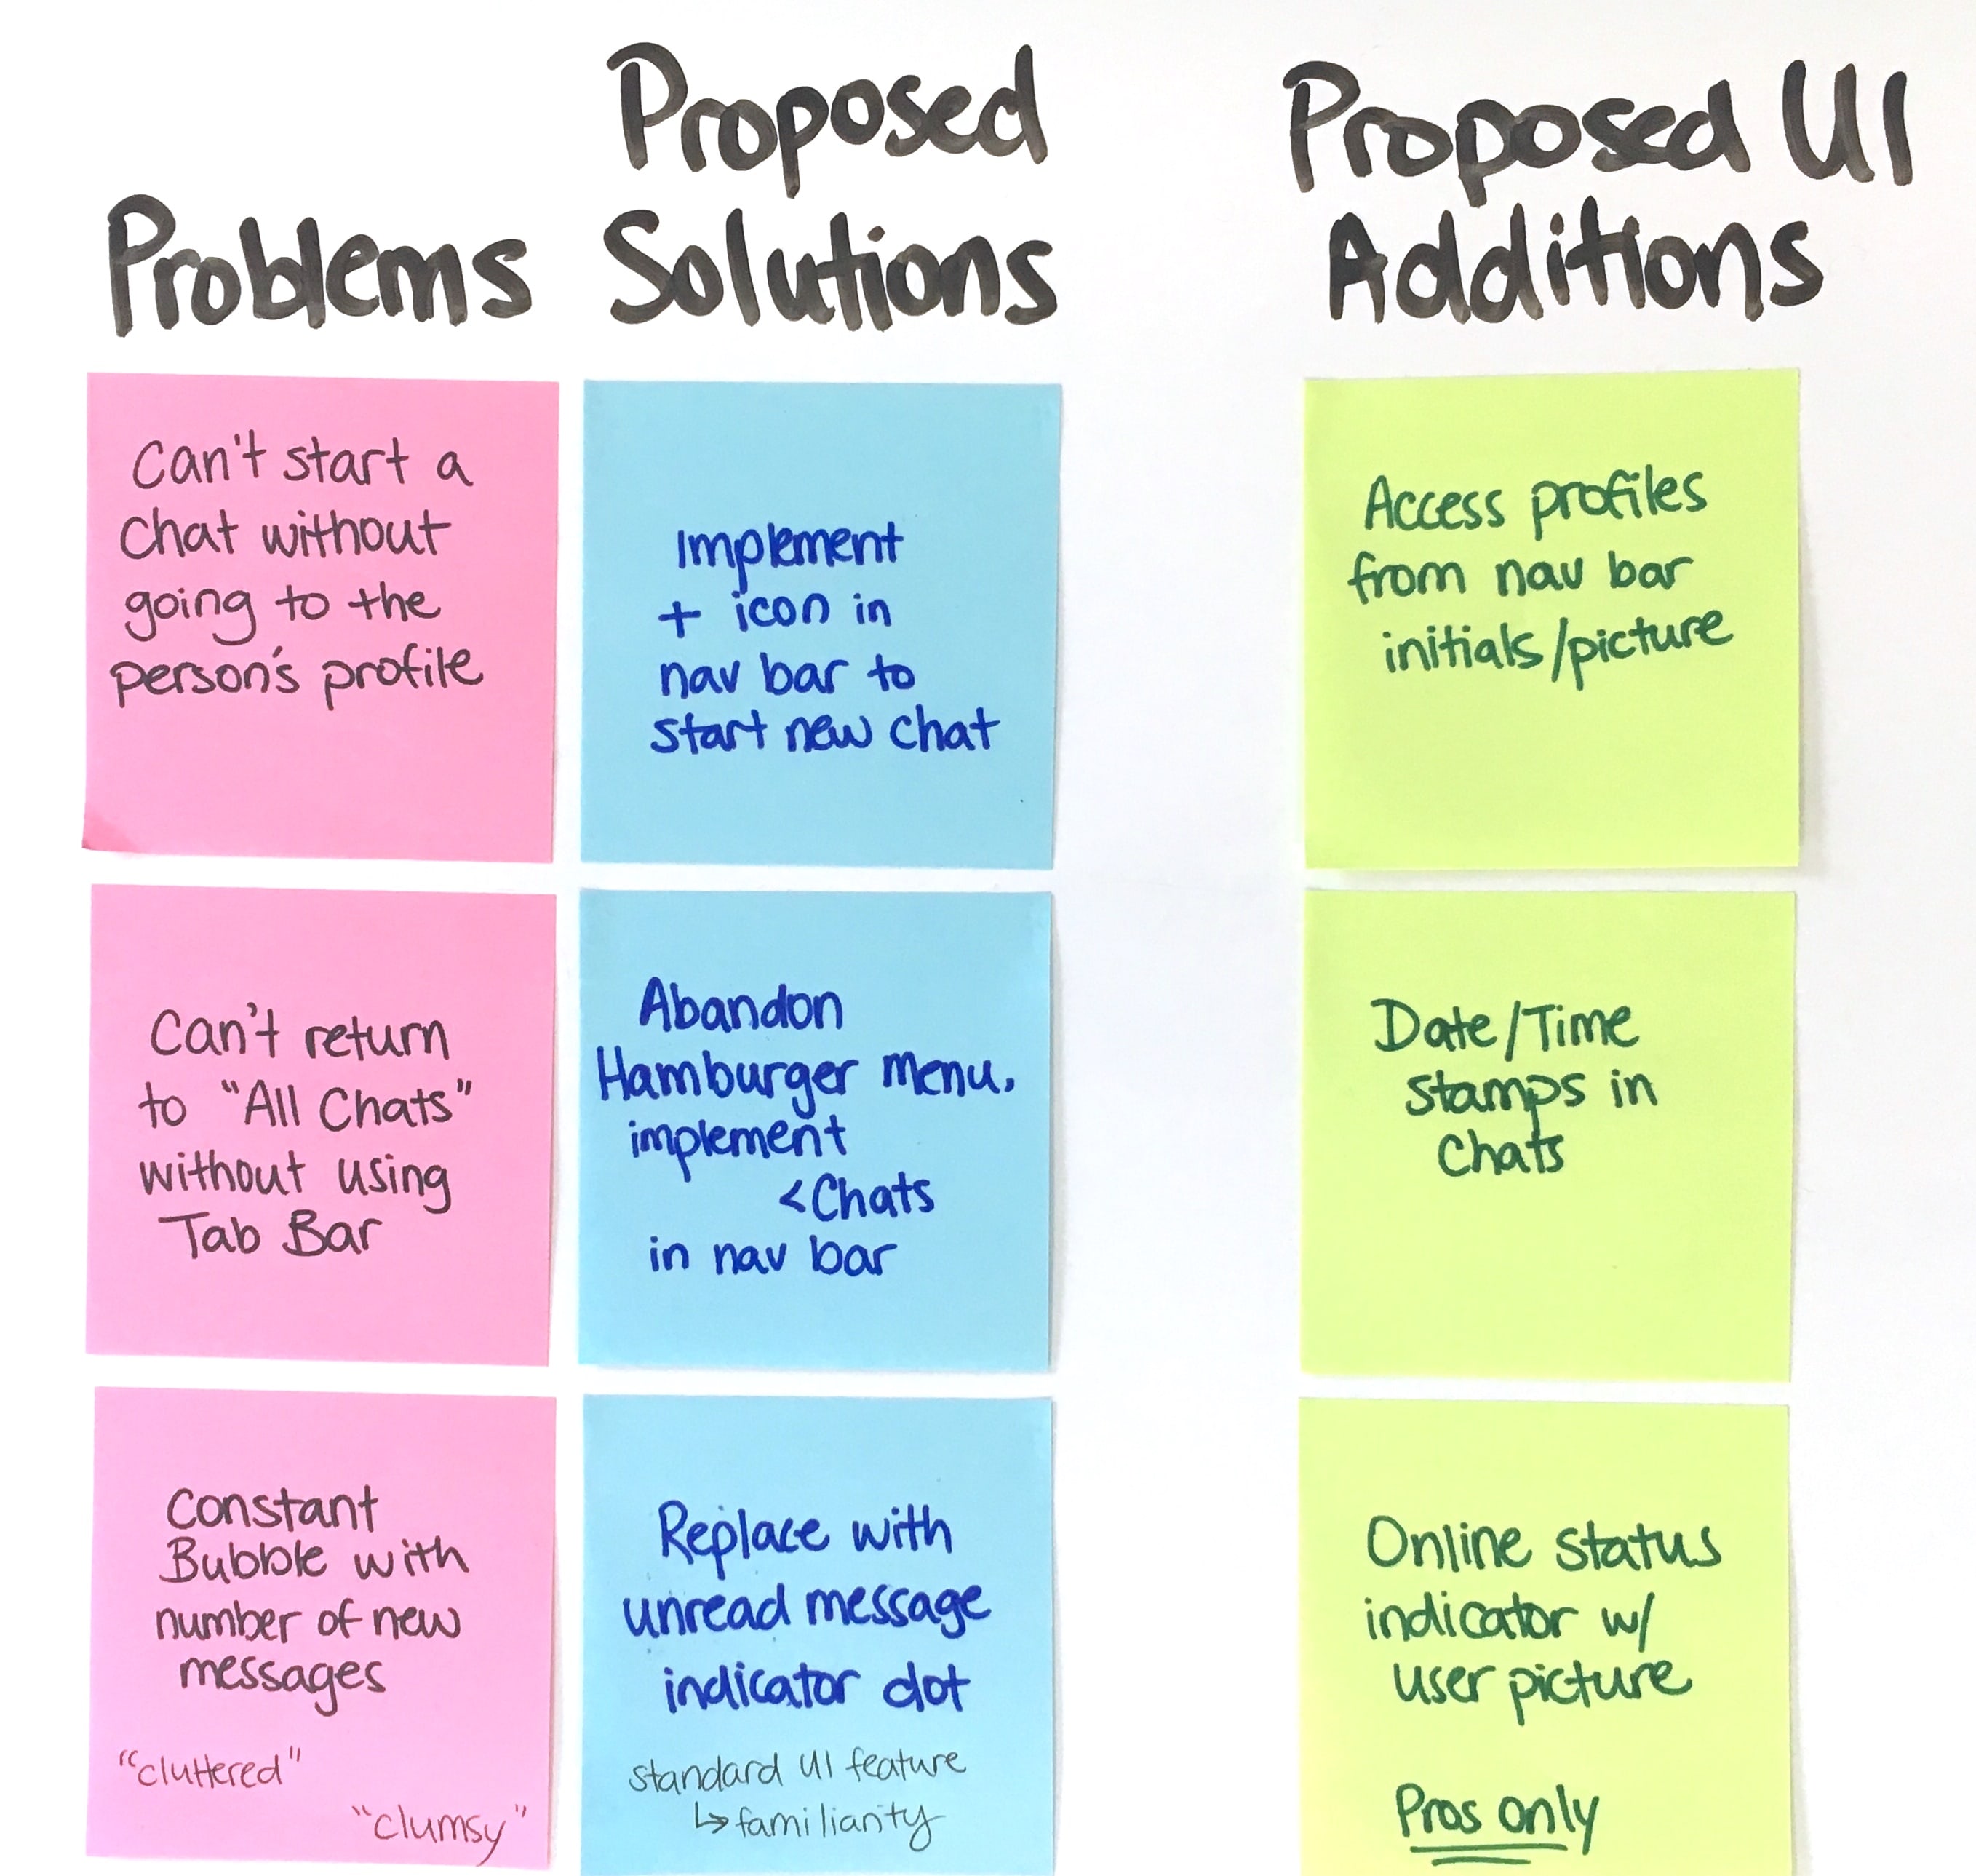 Figure 4.09 — Post-it notes with problem/solution pairings for improving the existing chat UI